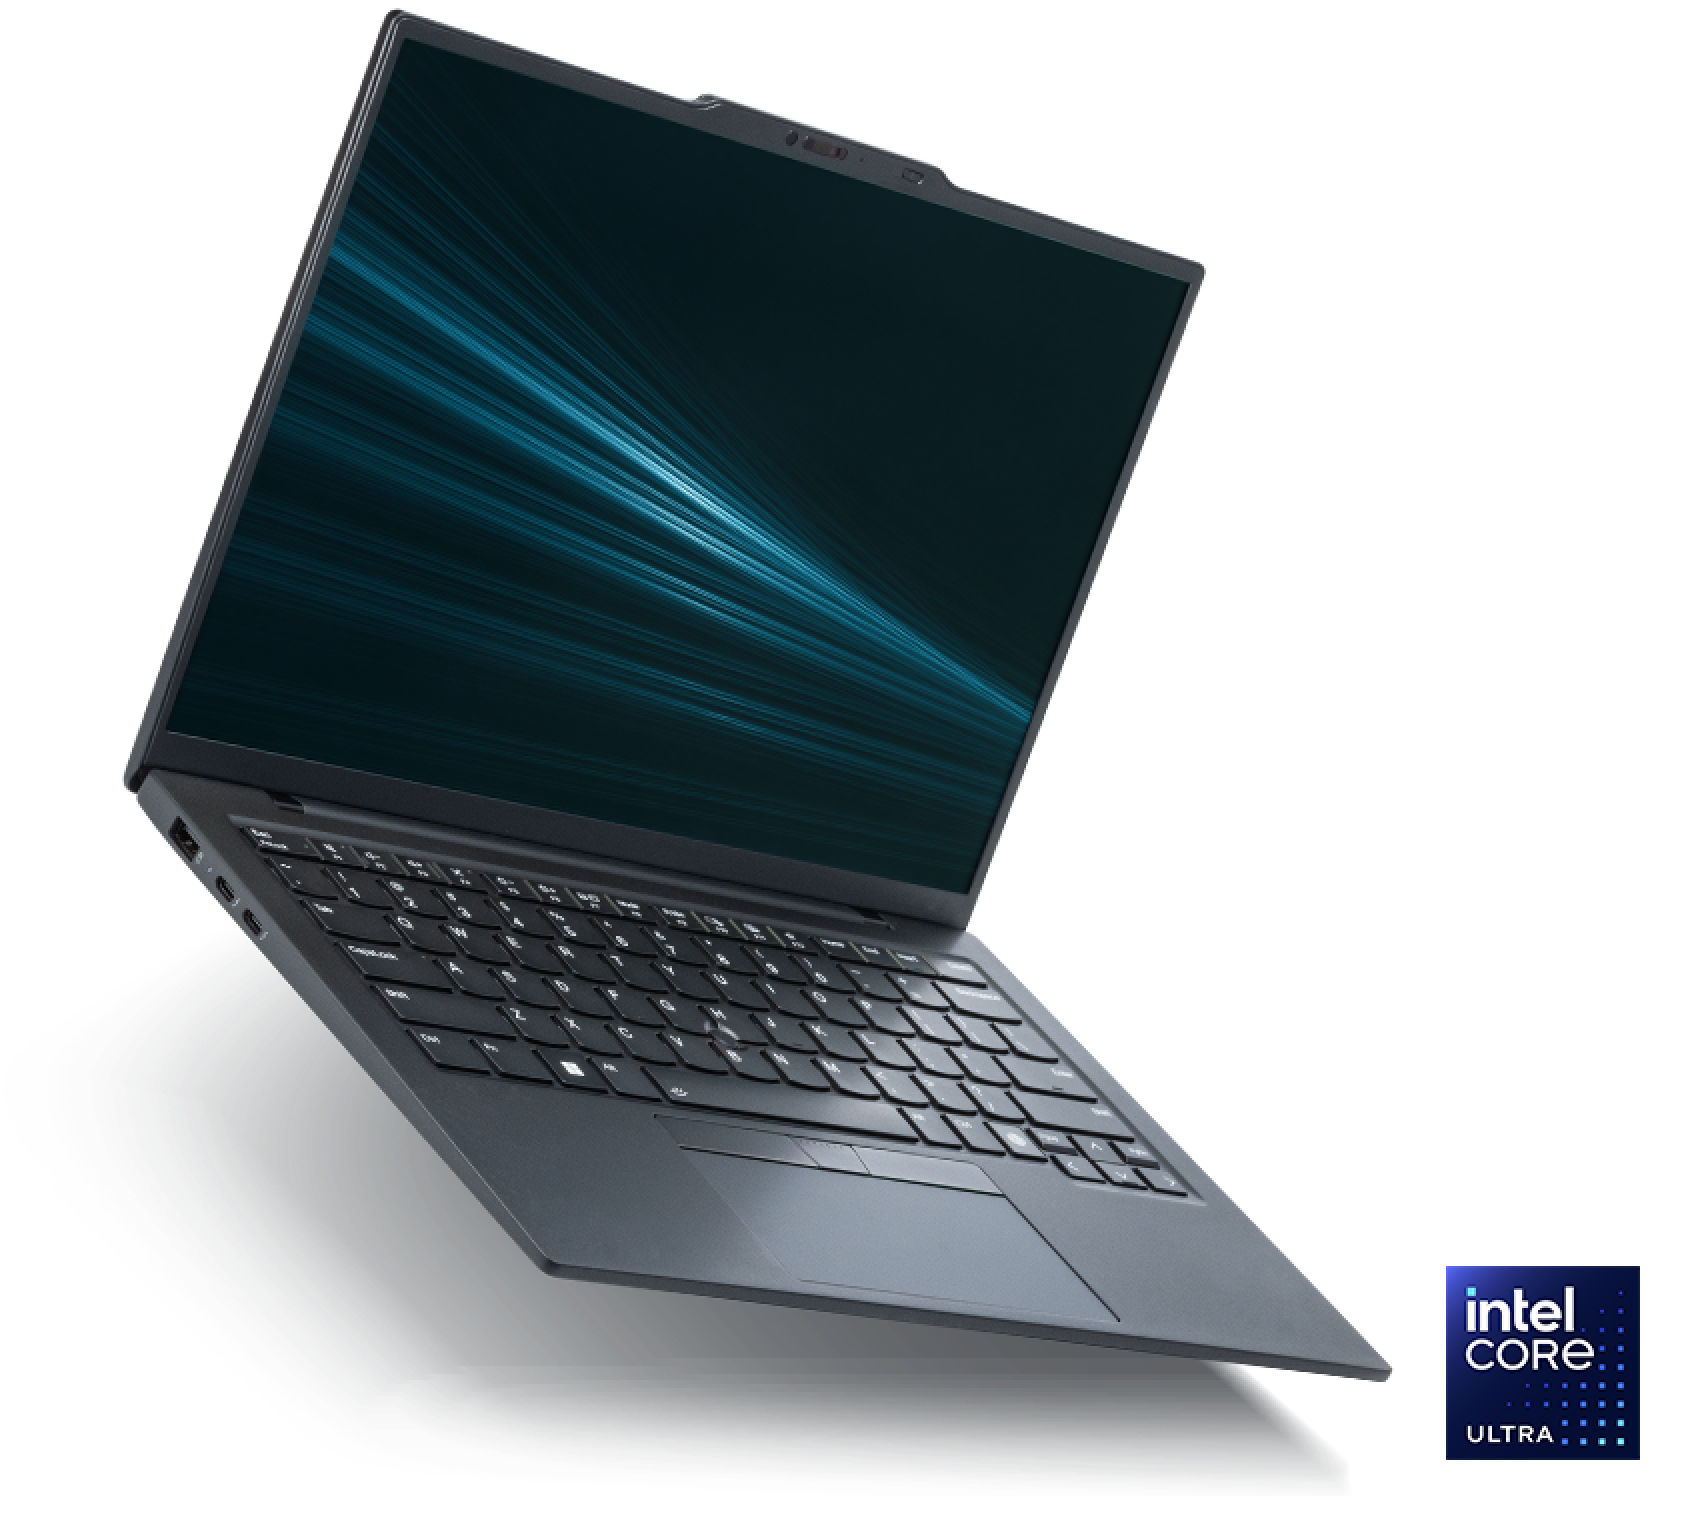 The Intel Evo Edition laptop equipped with an Intel Core Ultra processor.